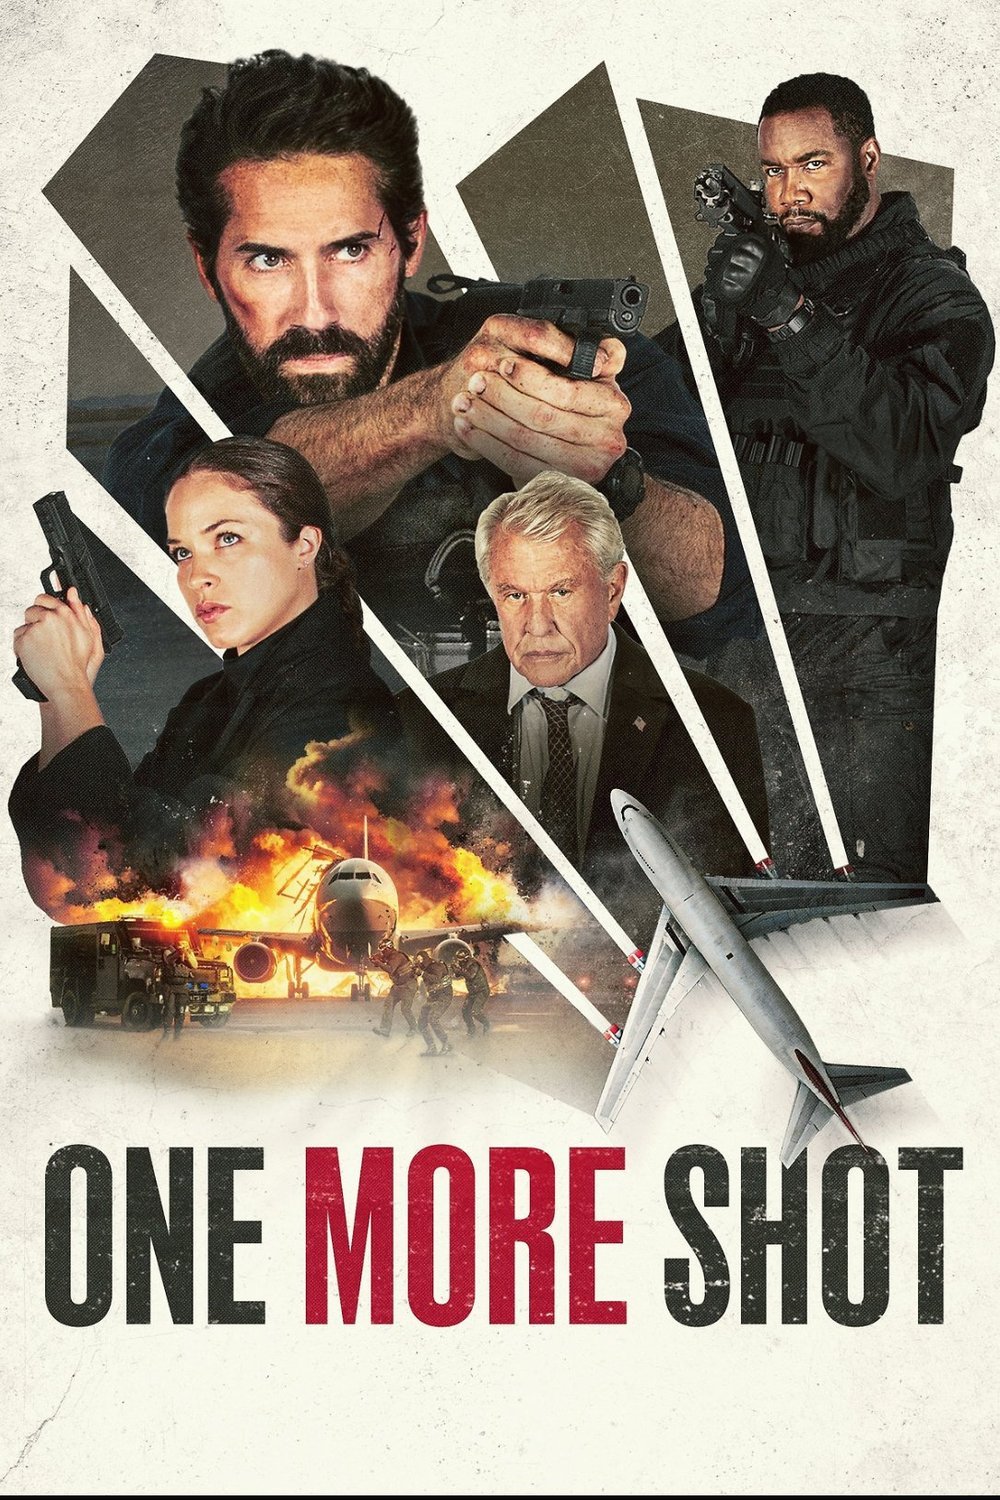 Poster of the movie One More Shot